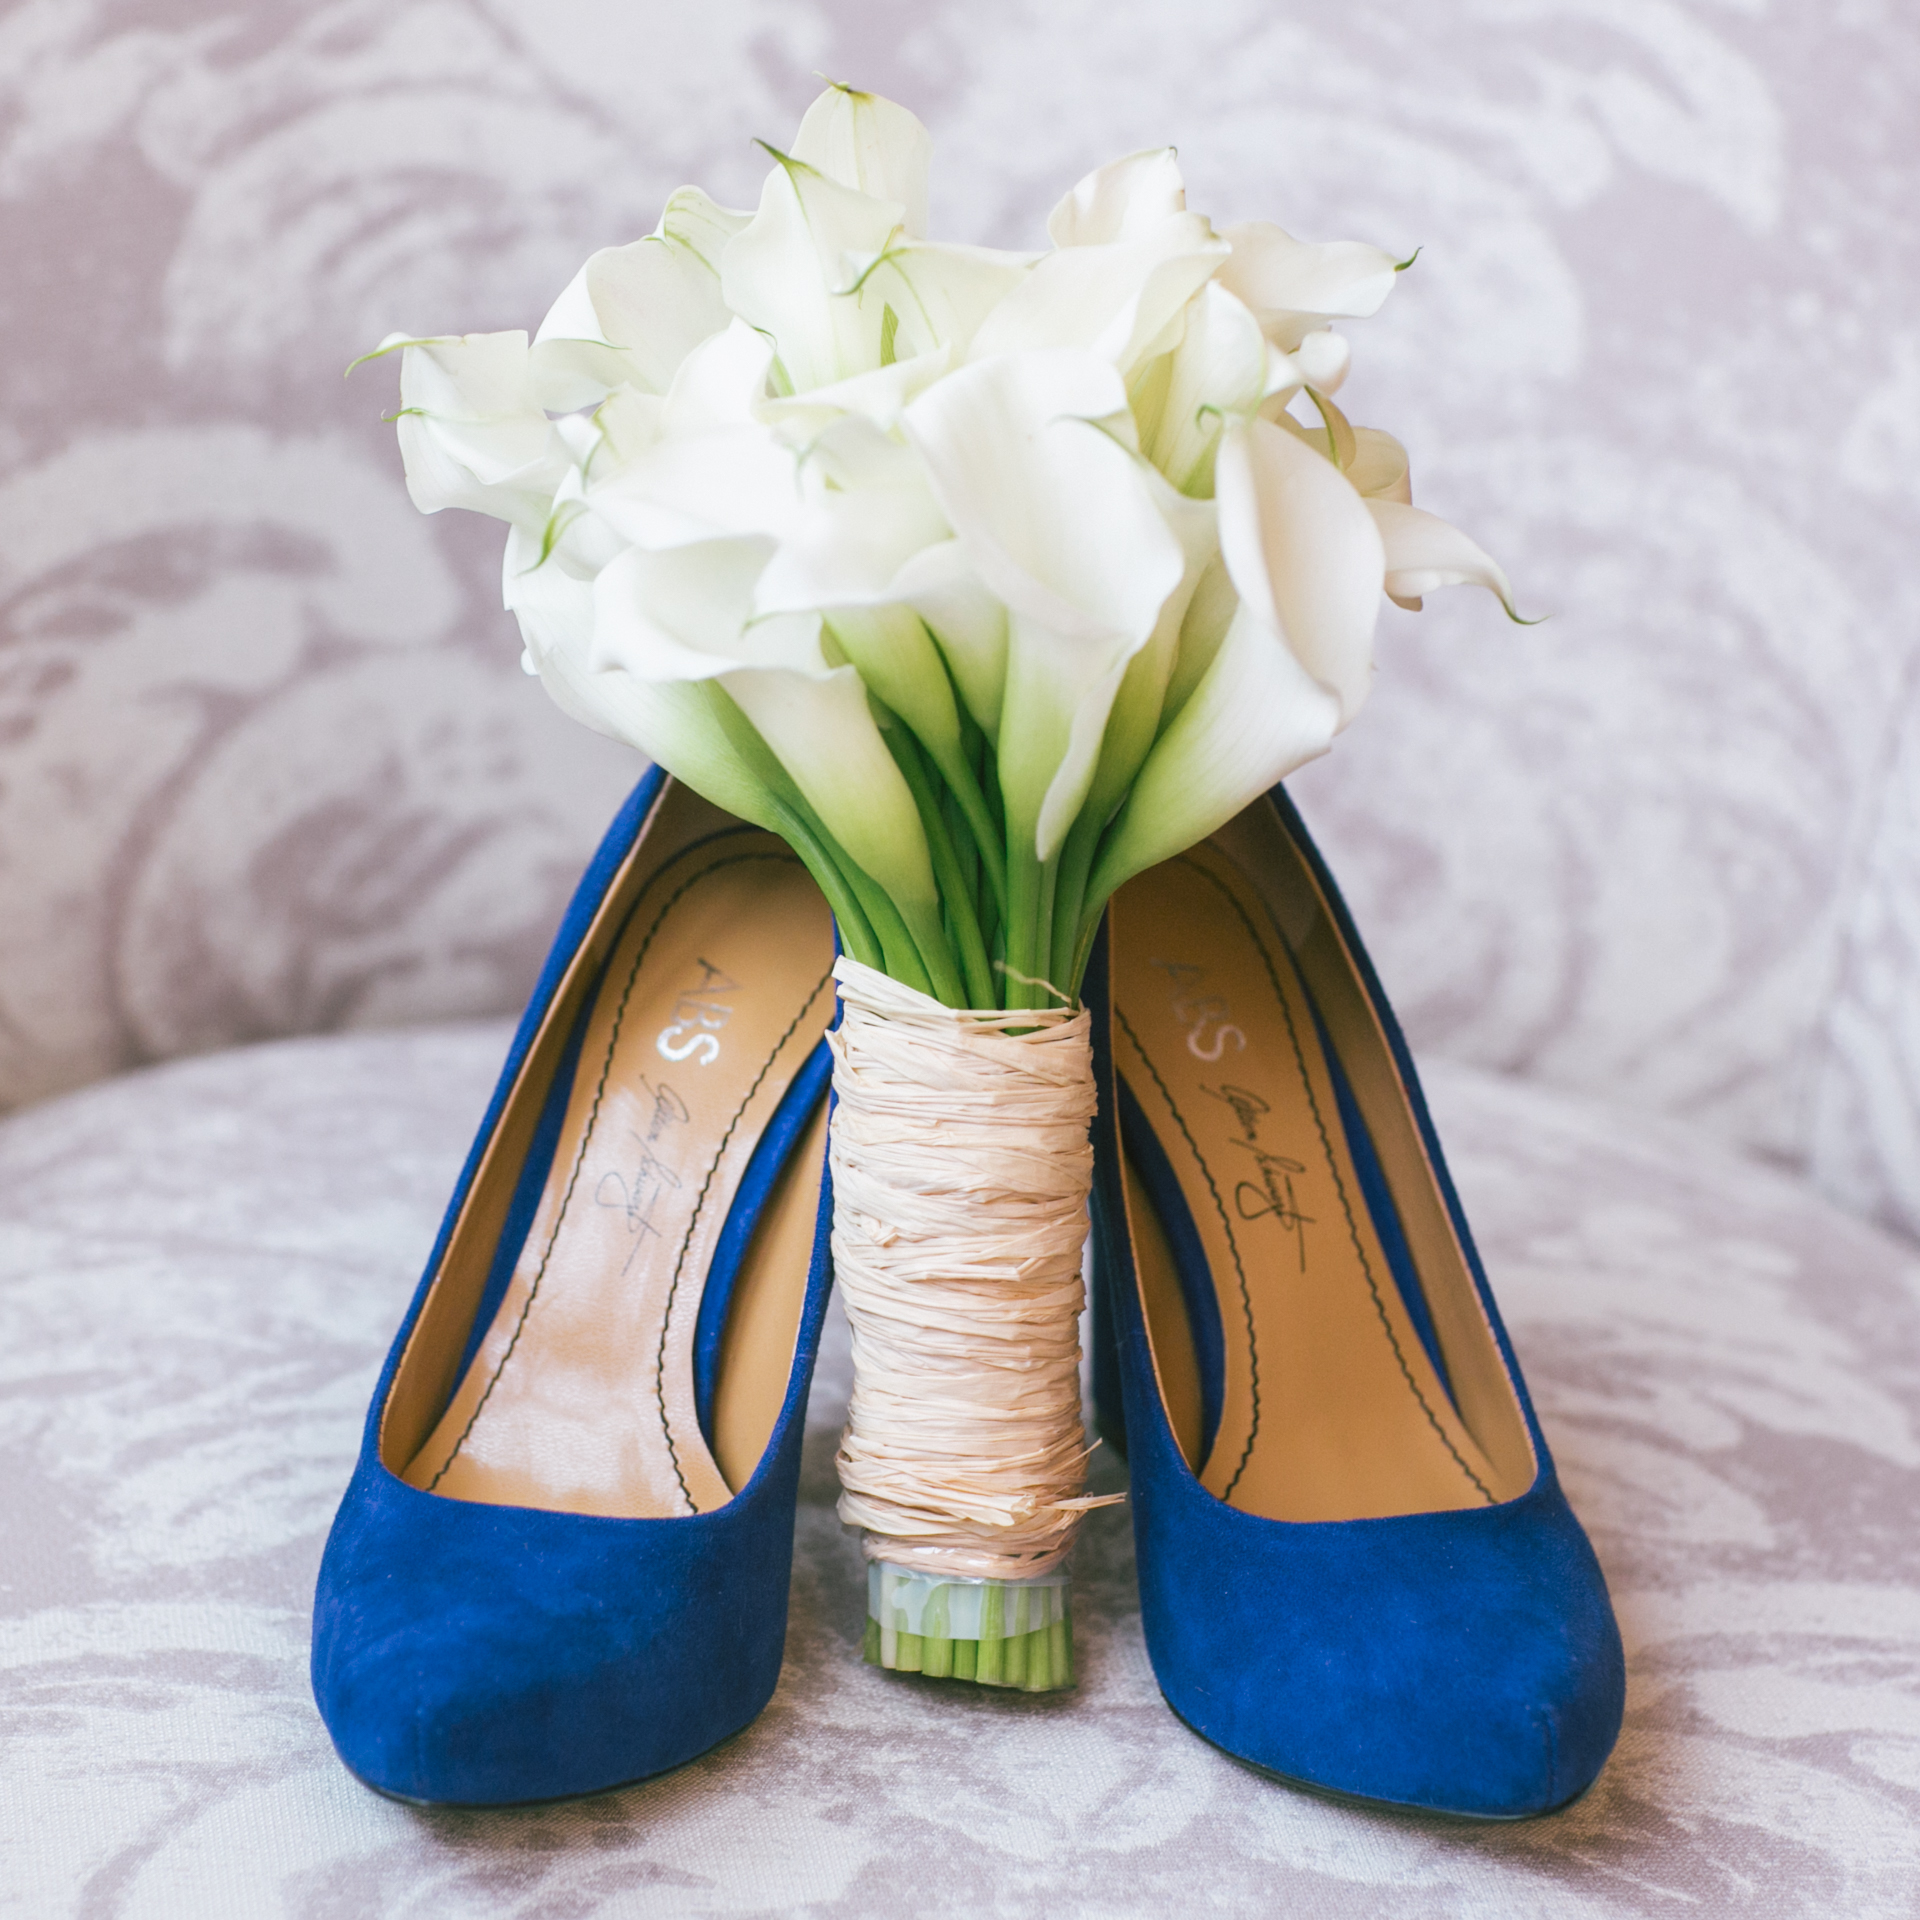  The bride's wedding shoes and flower bouquet 